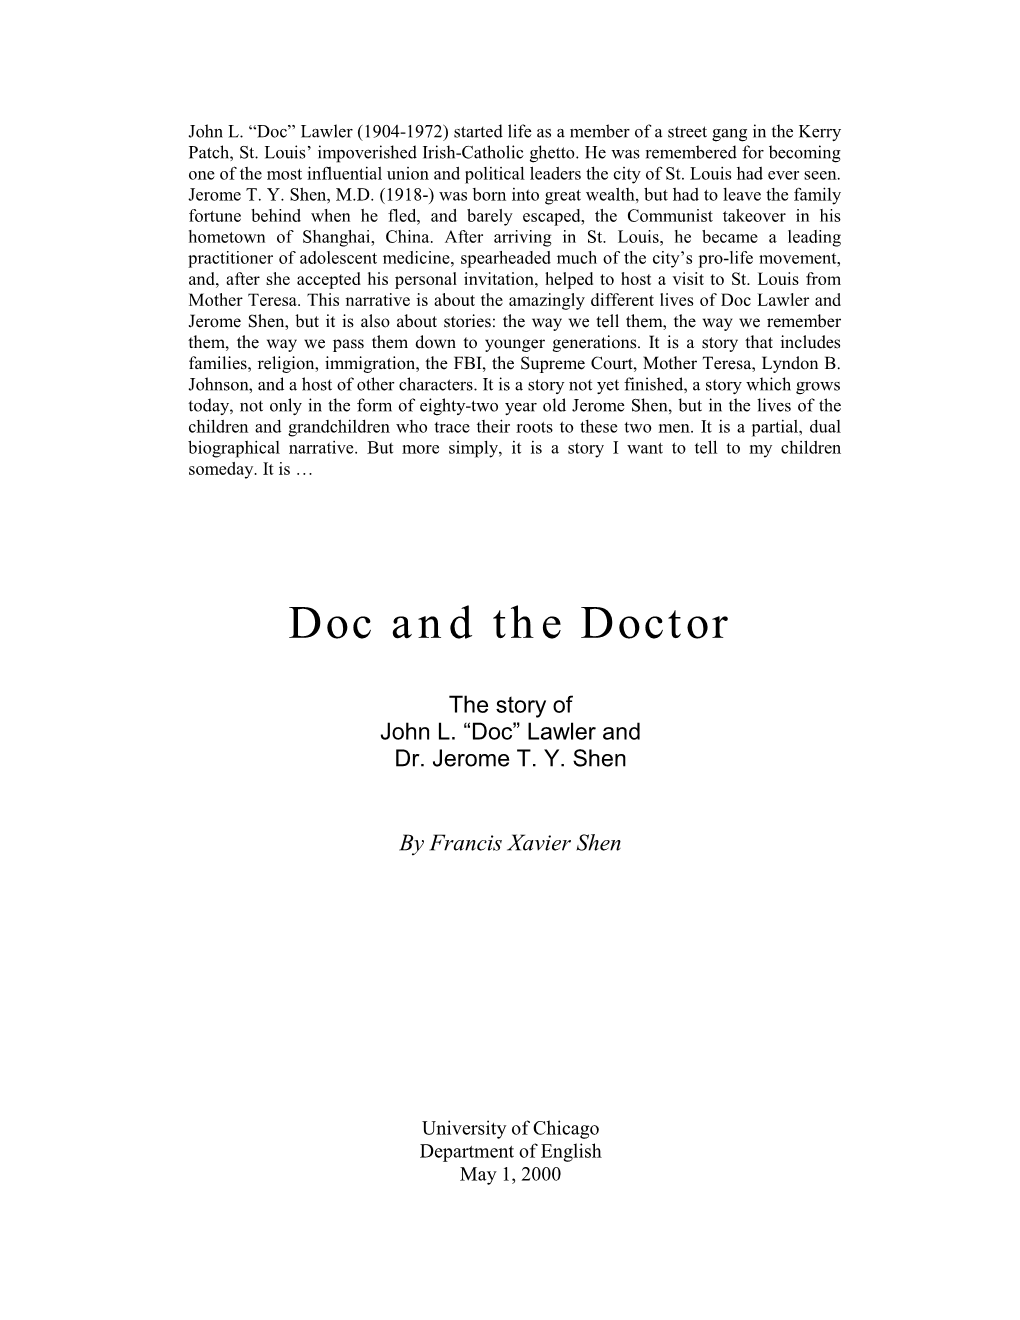 Doc and the Doctor: the Story of John L